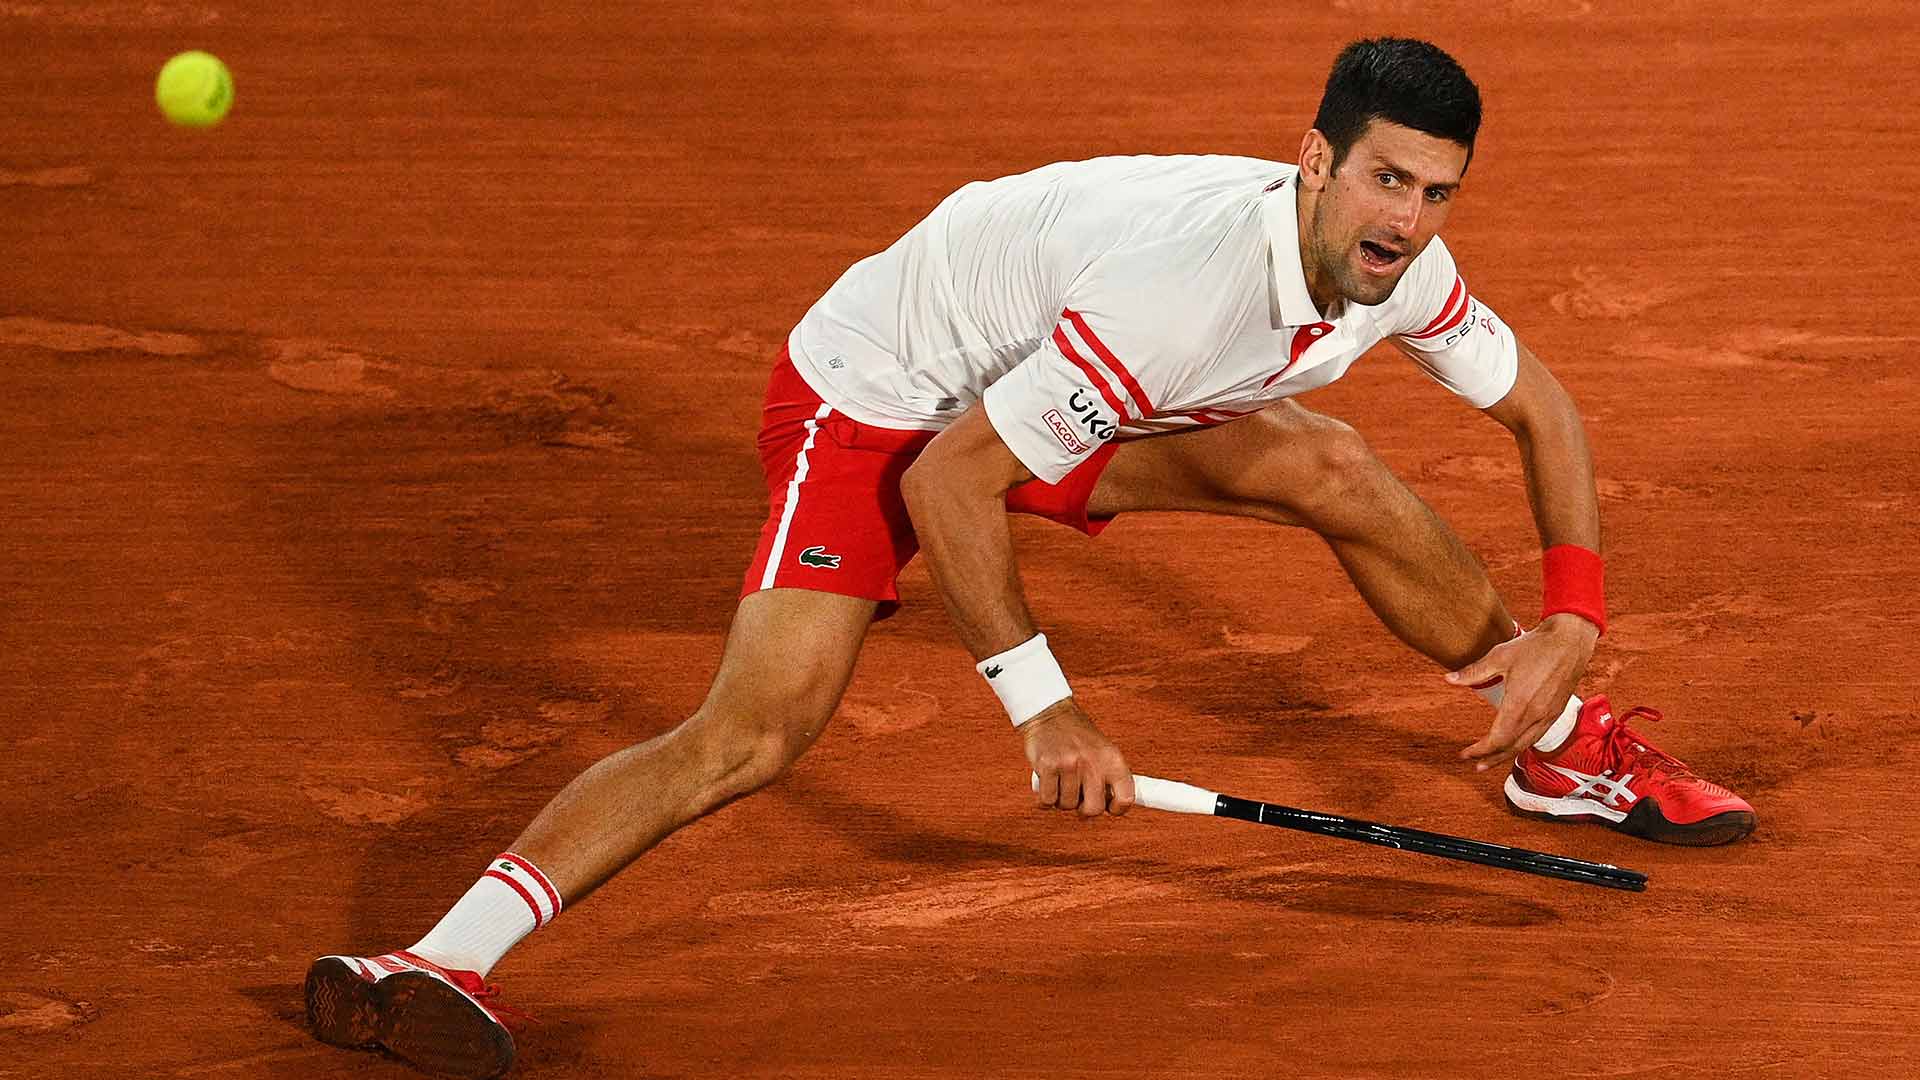 Novak Djokovic is the only player to beat Rafael Nadal twice at Roland Garros.